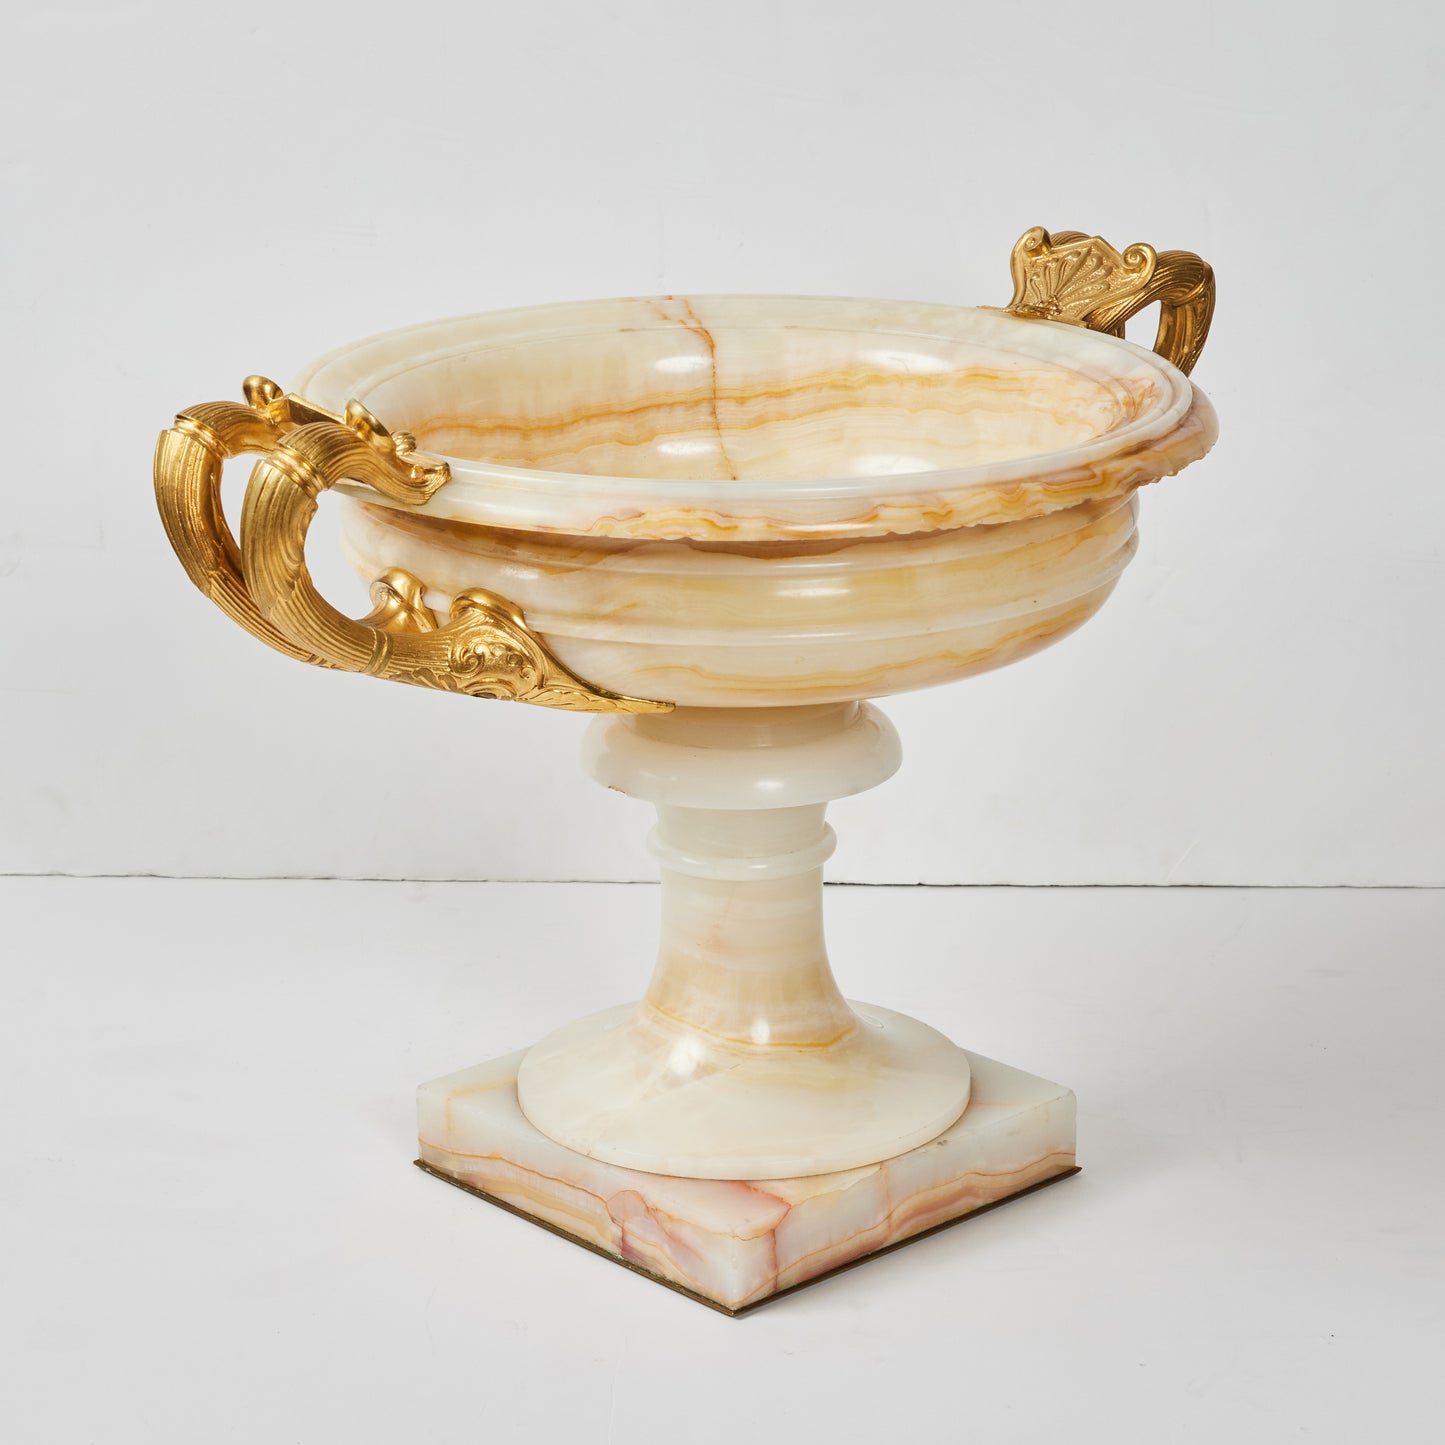 Pair Empire Onyx and Gilded Bronze Tazza